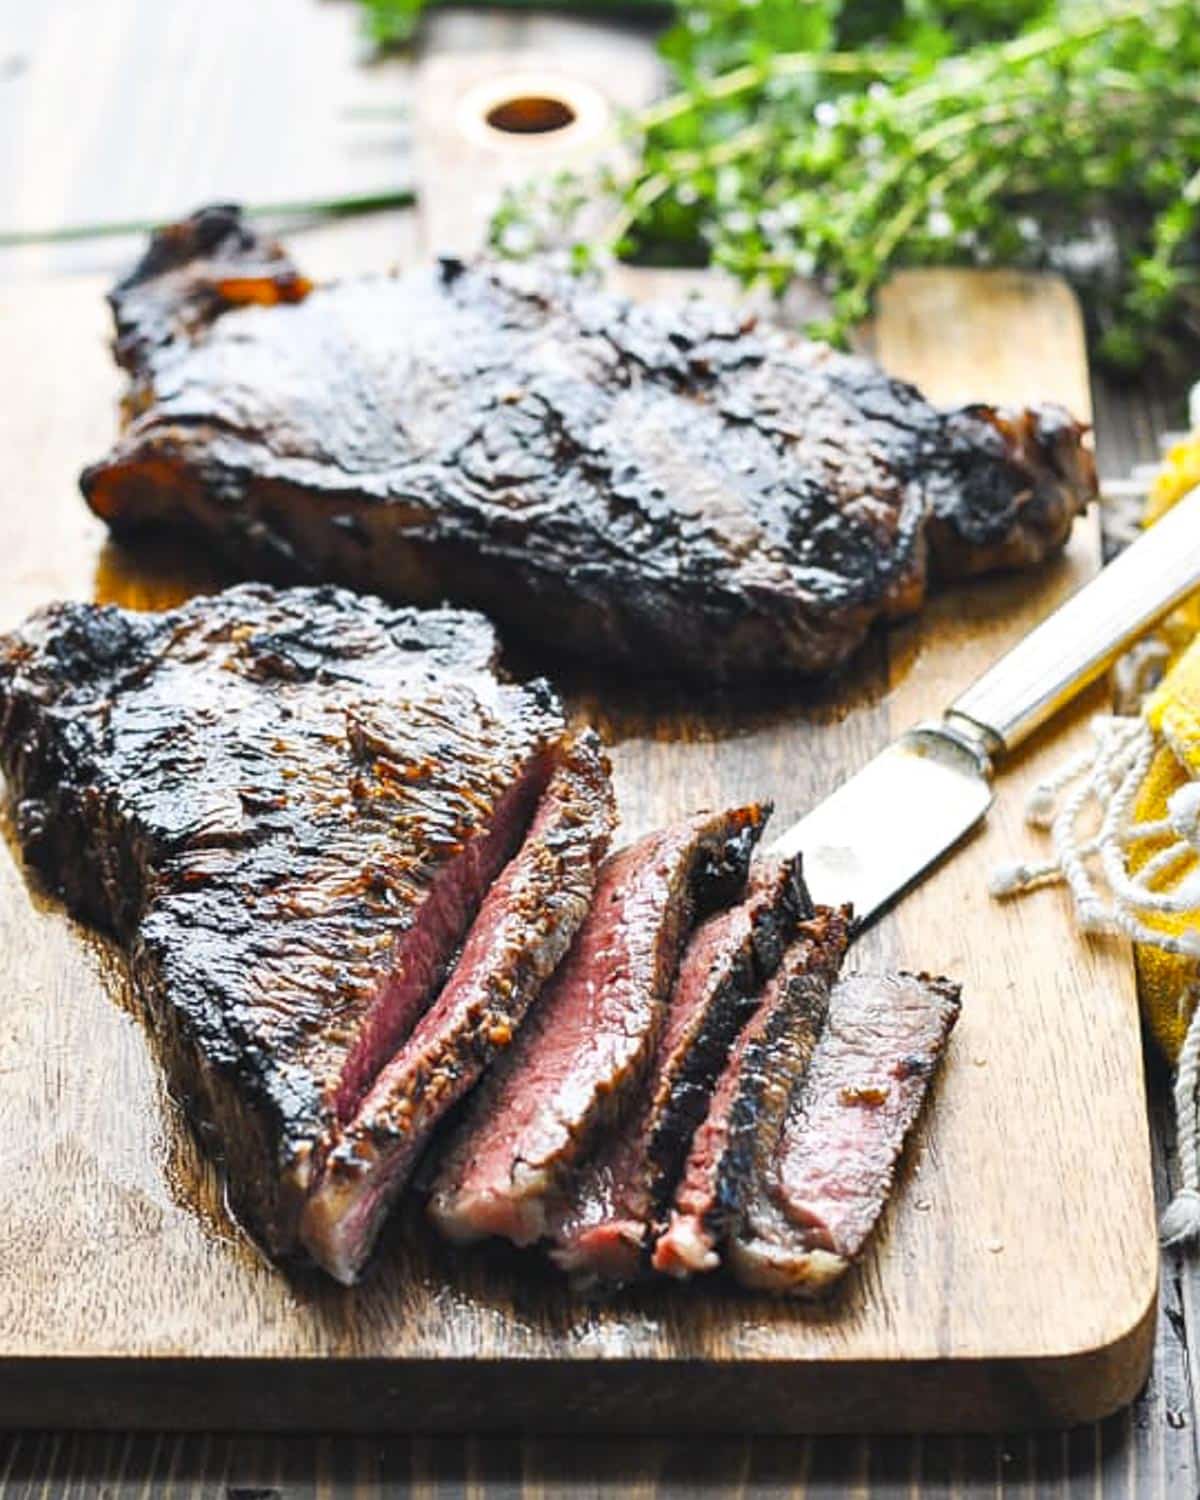 Grilled steaks on a wooden cutting board.